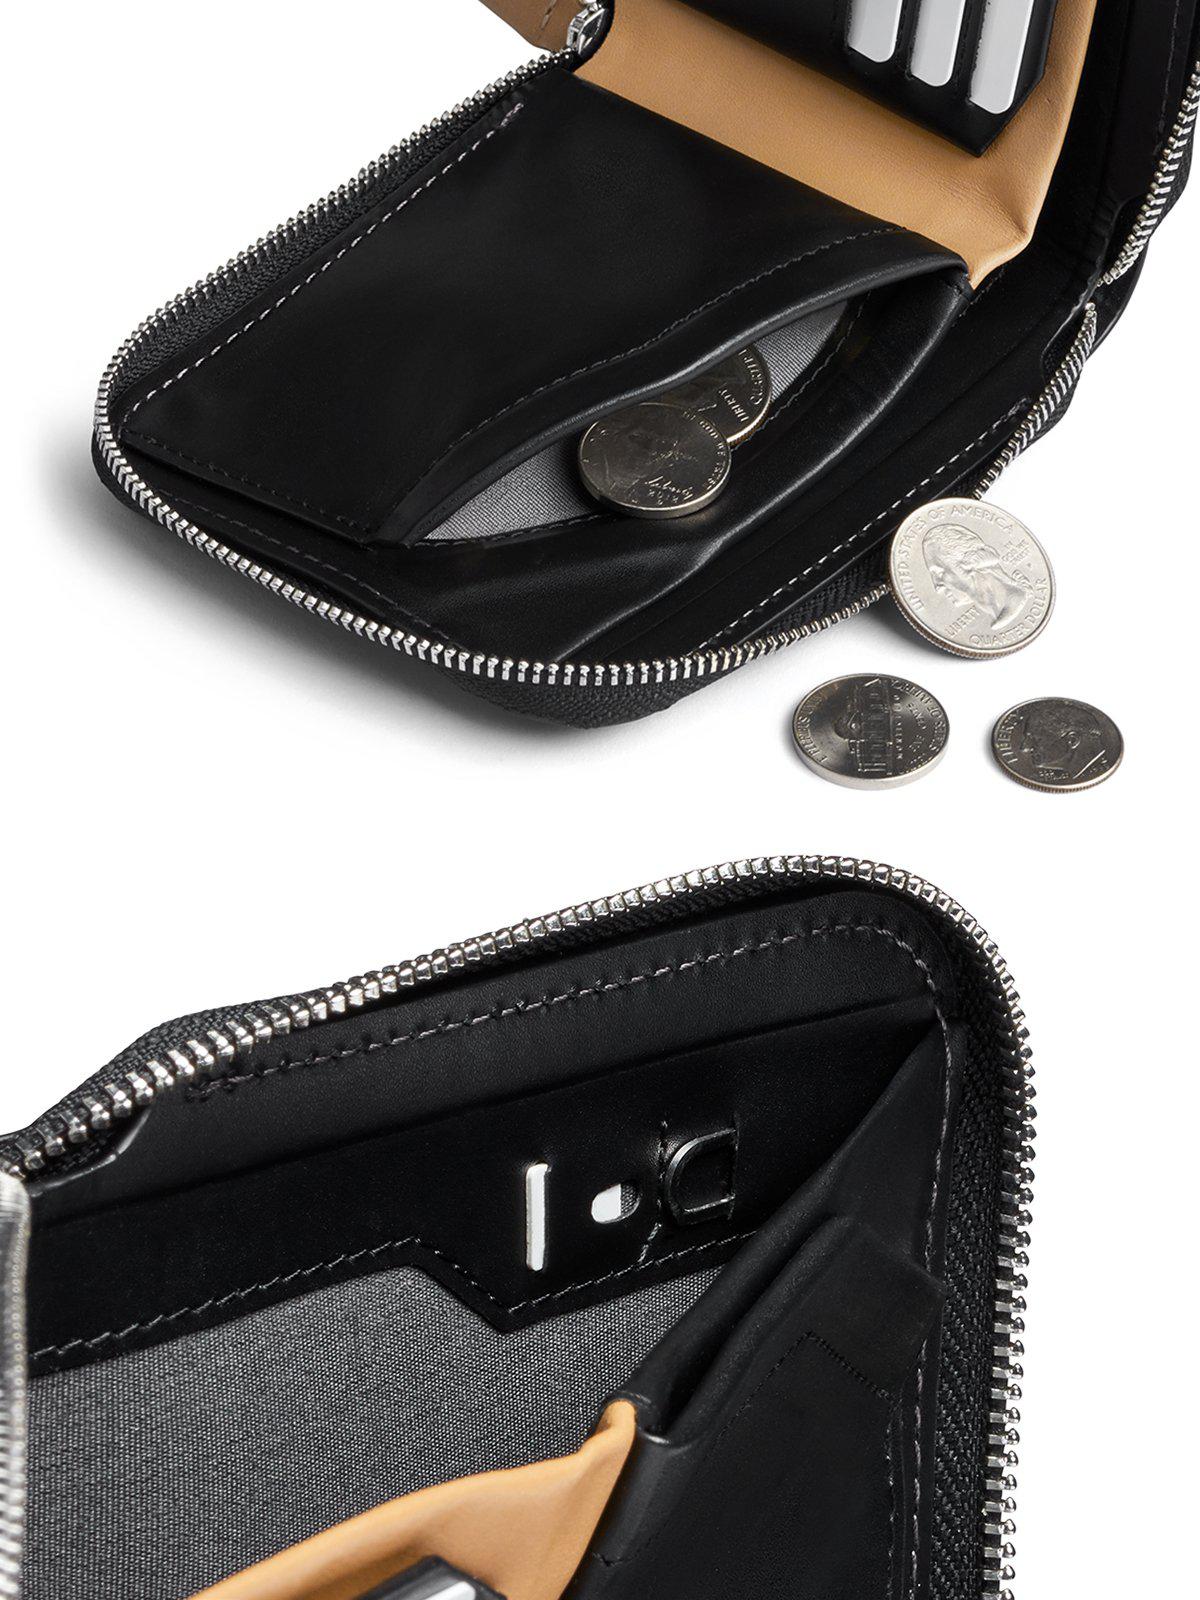 Bellroy Zip Wallet Black RFID - MORE by Morello Indonesia